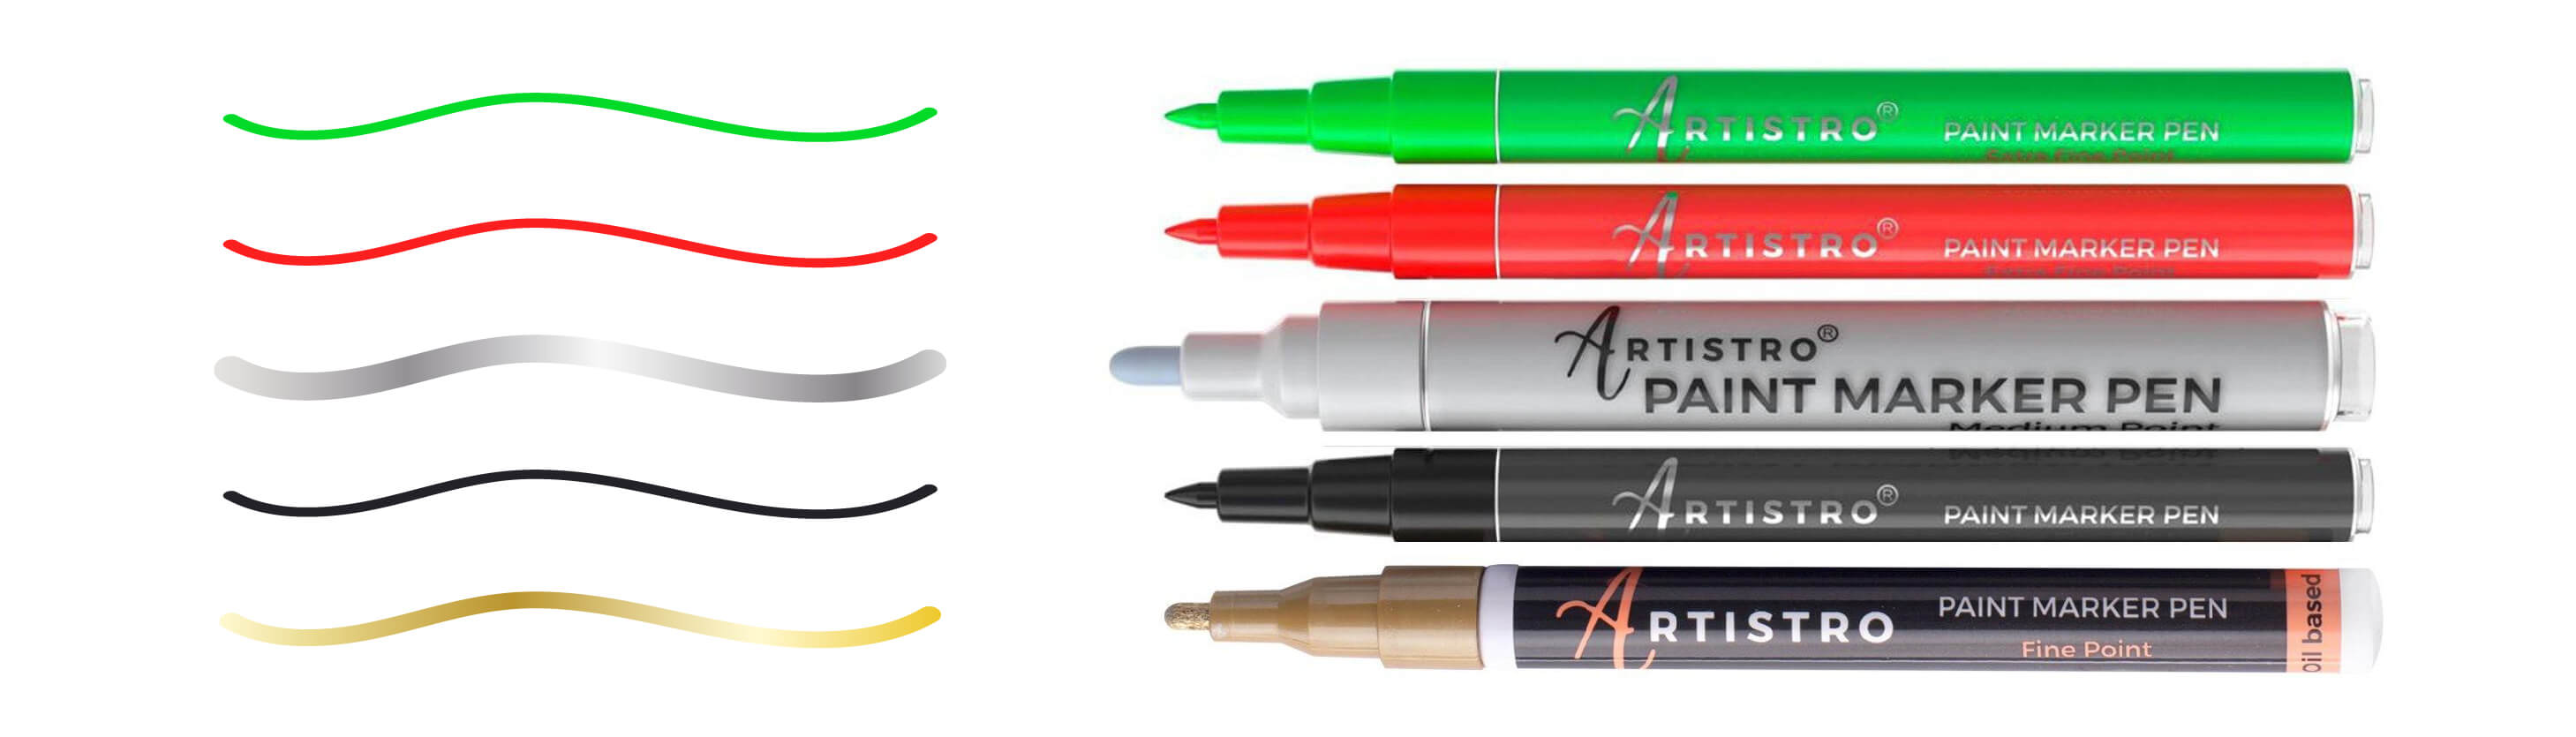 Free sample markers